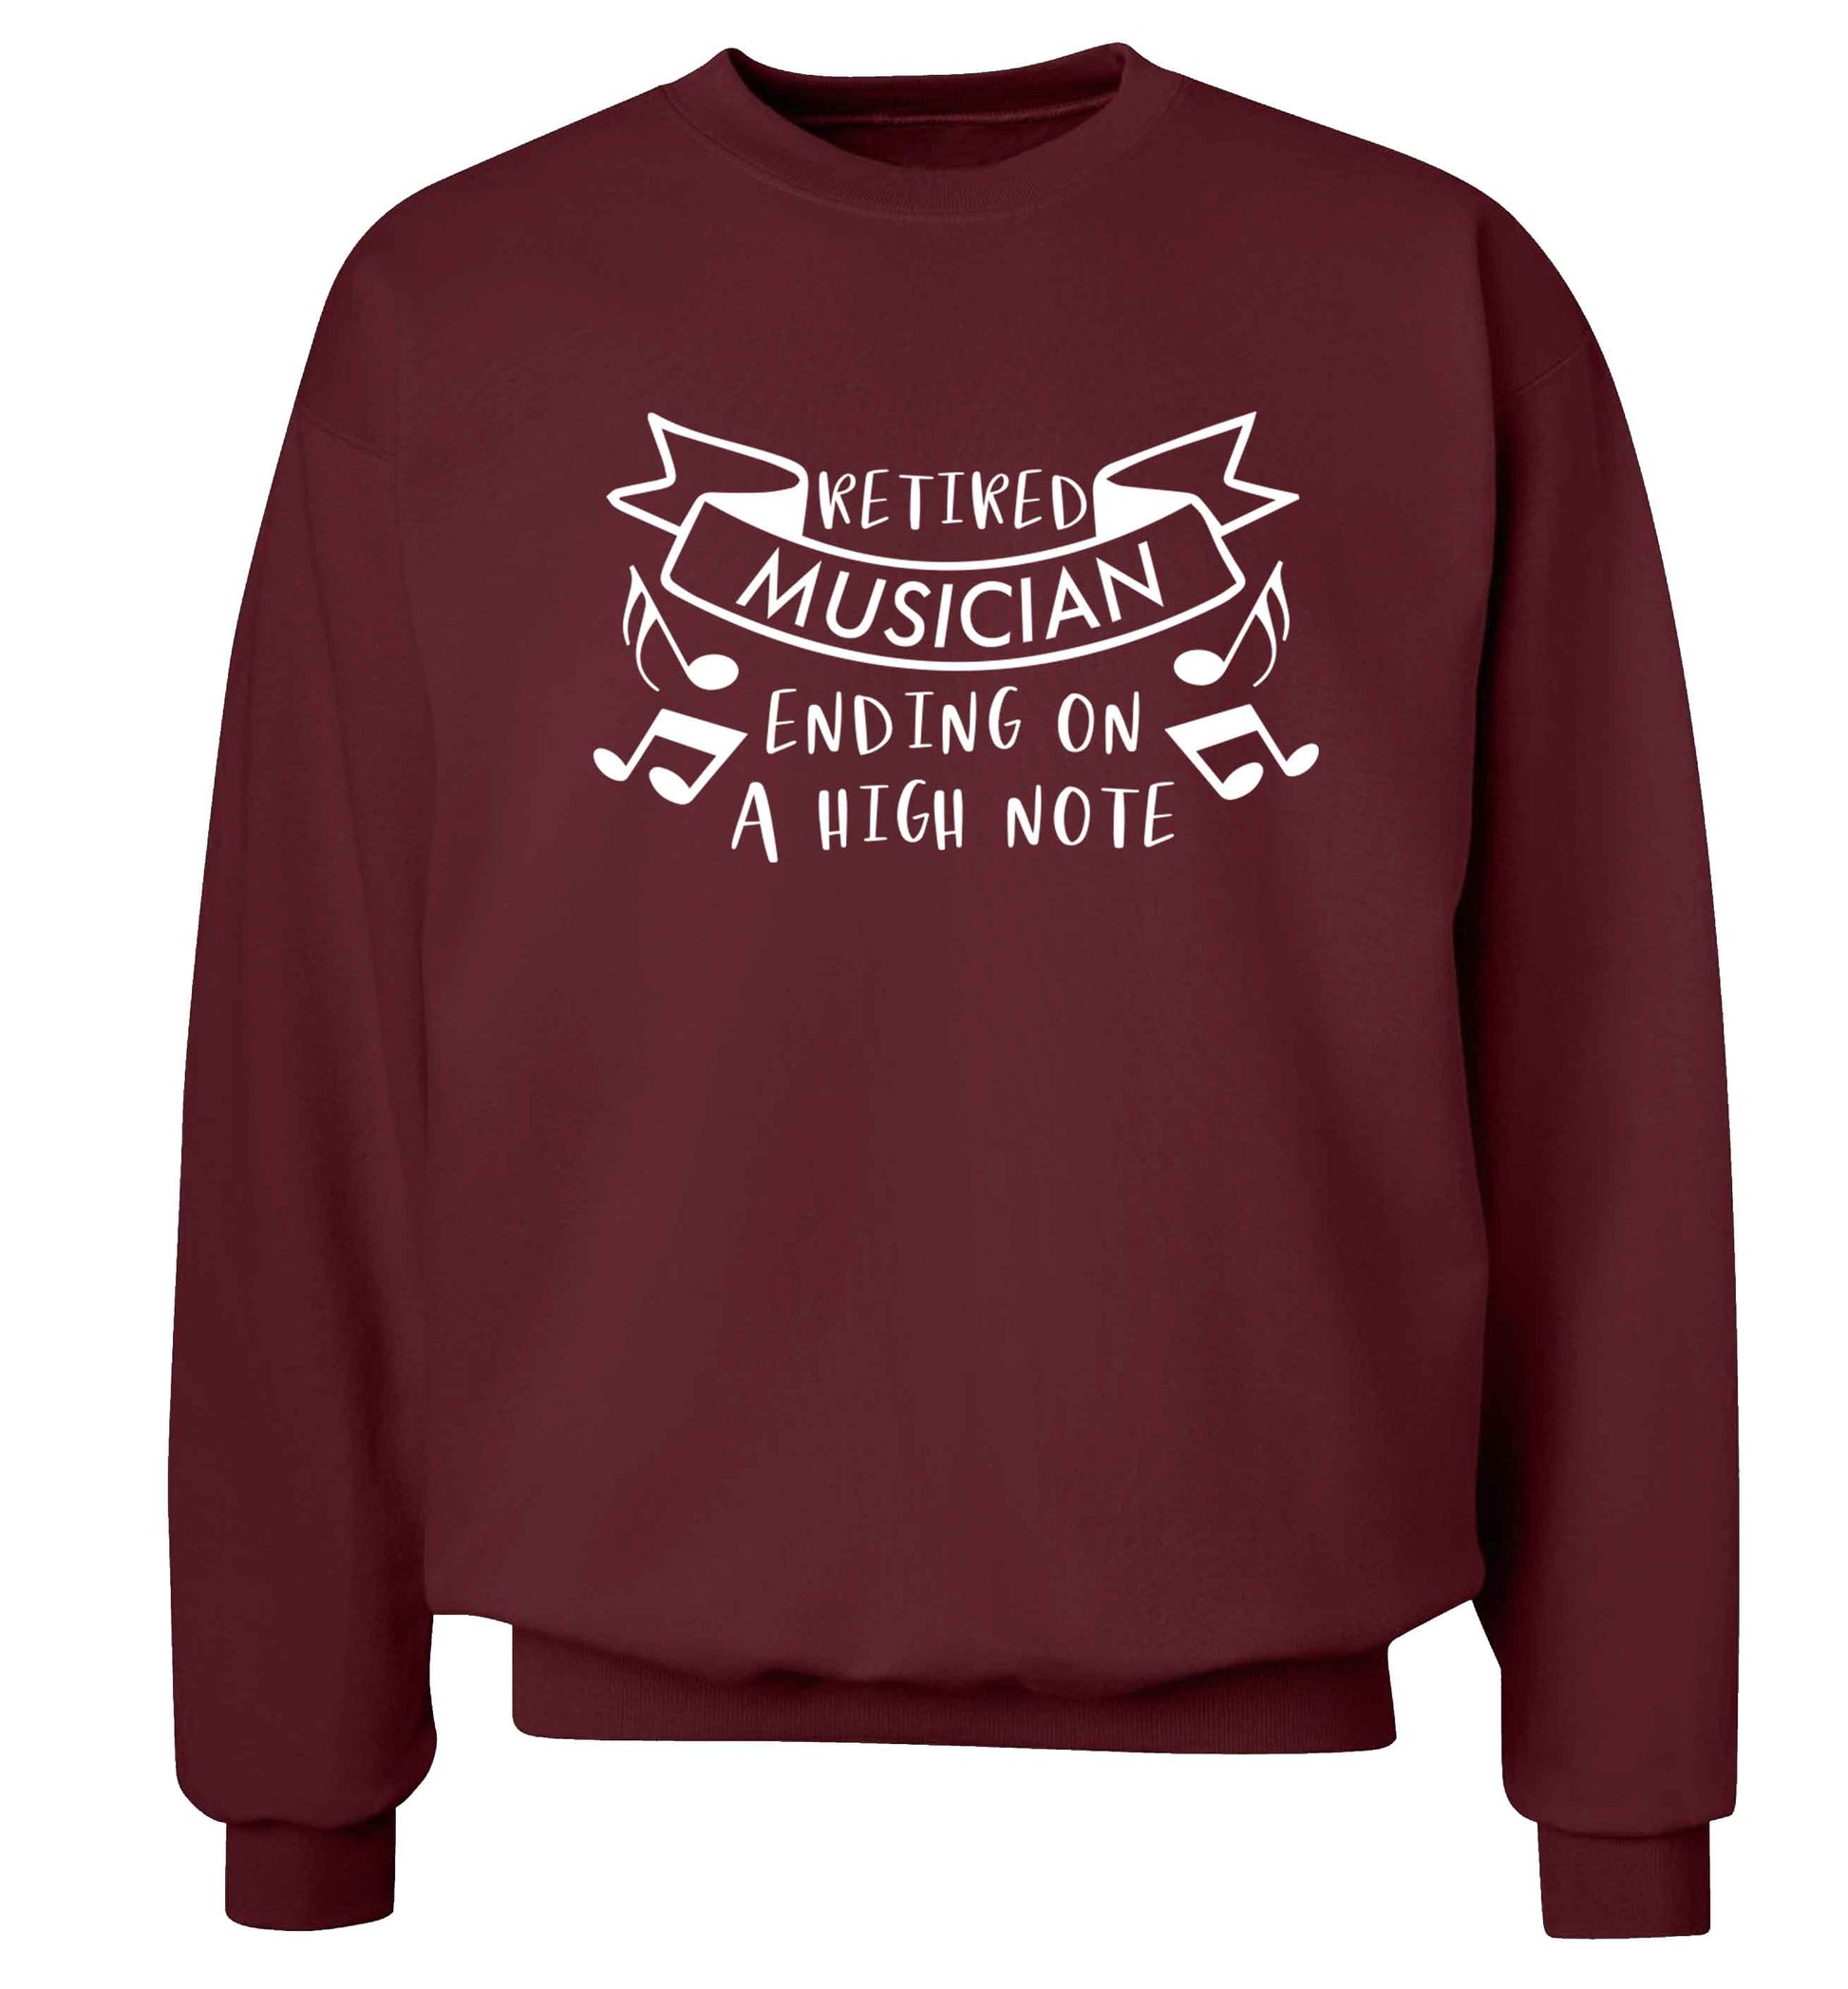 Retired musician ending on a high note Adult's unisex maroon Sweater 2XL